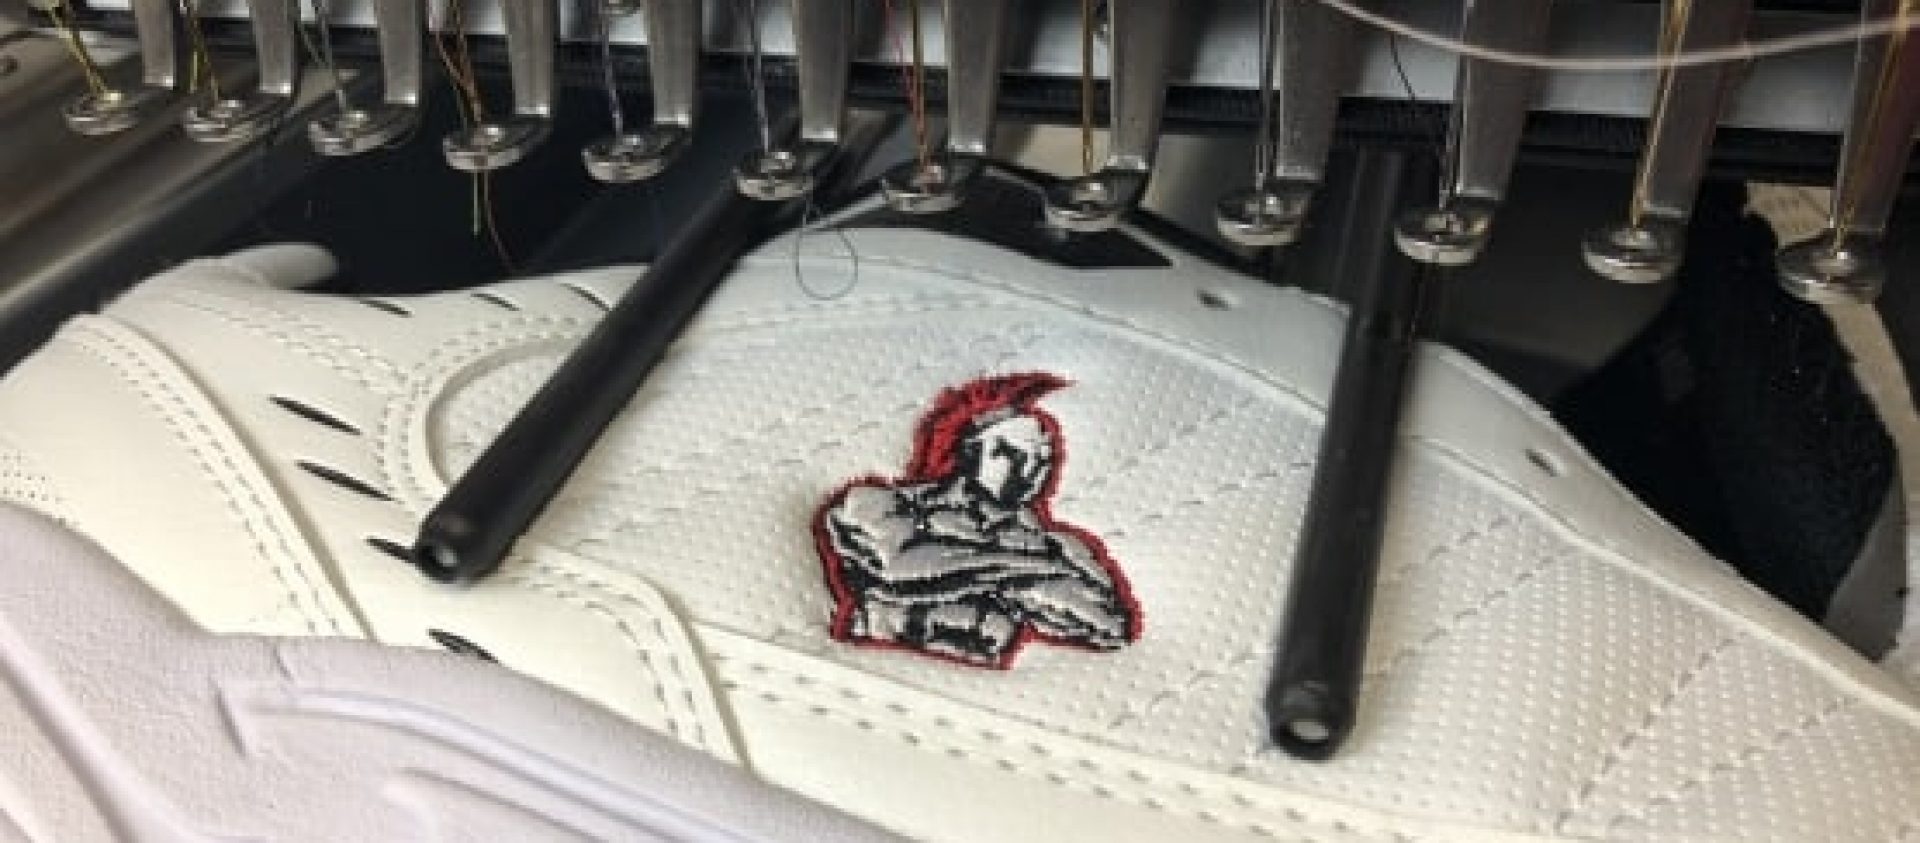 embroidery-grip-clamp-shoe-close-up_555x416